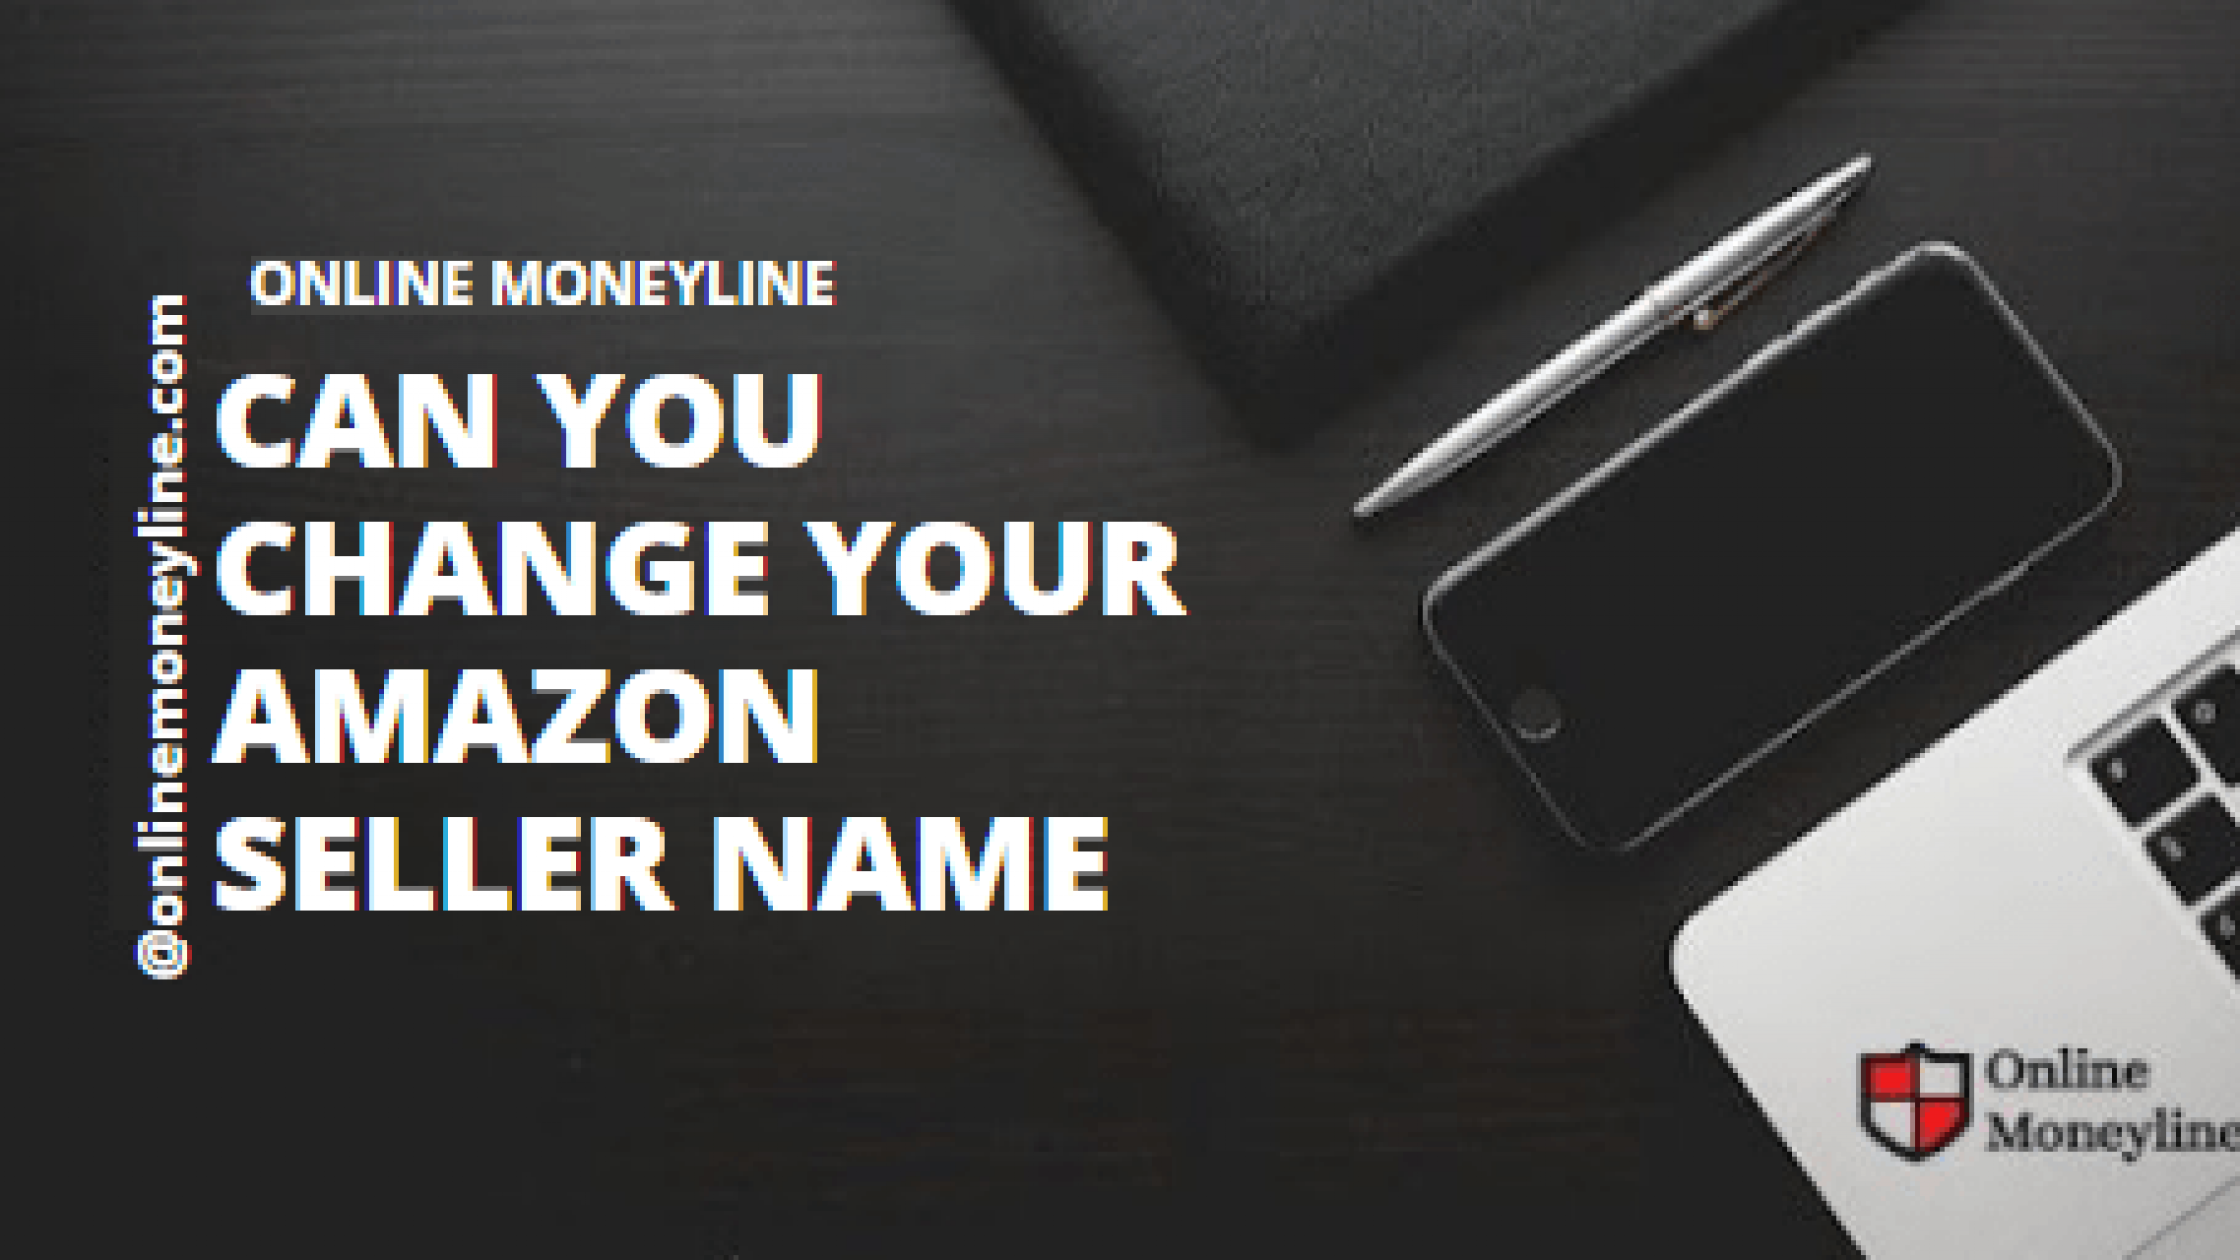 Can You Change Your Amazon Seller Name?